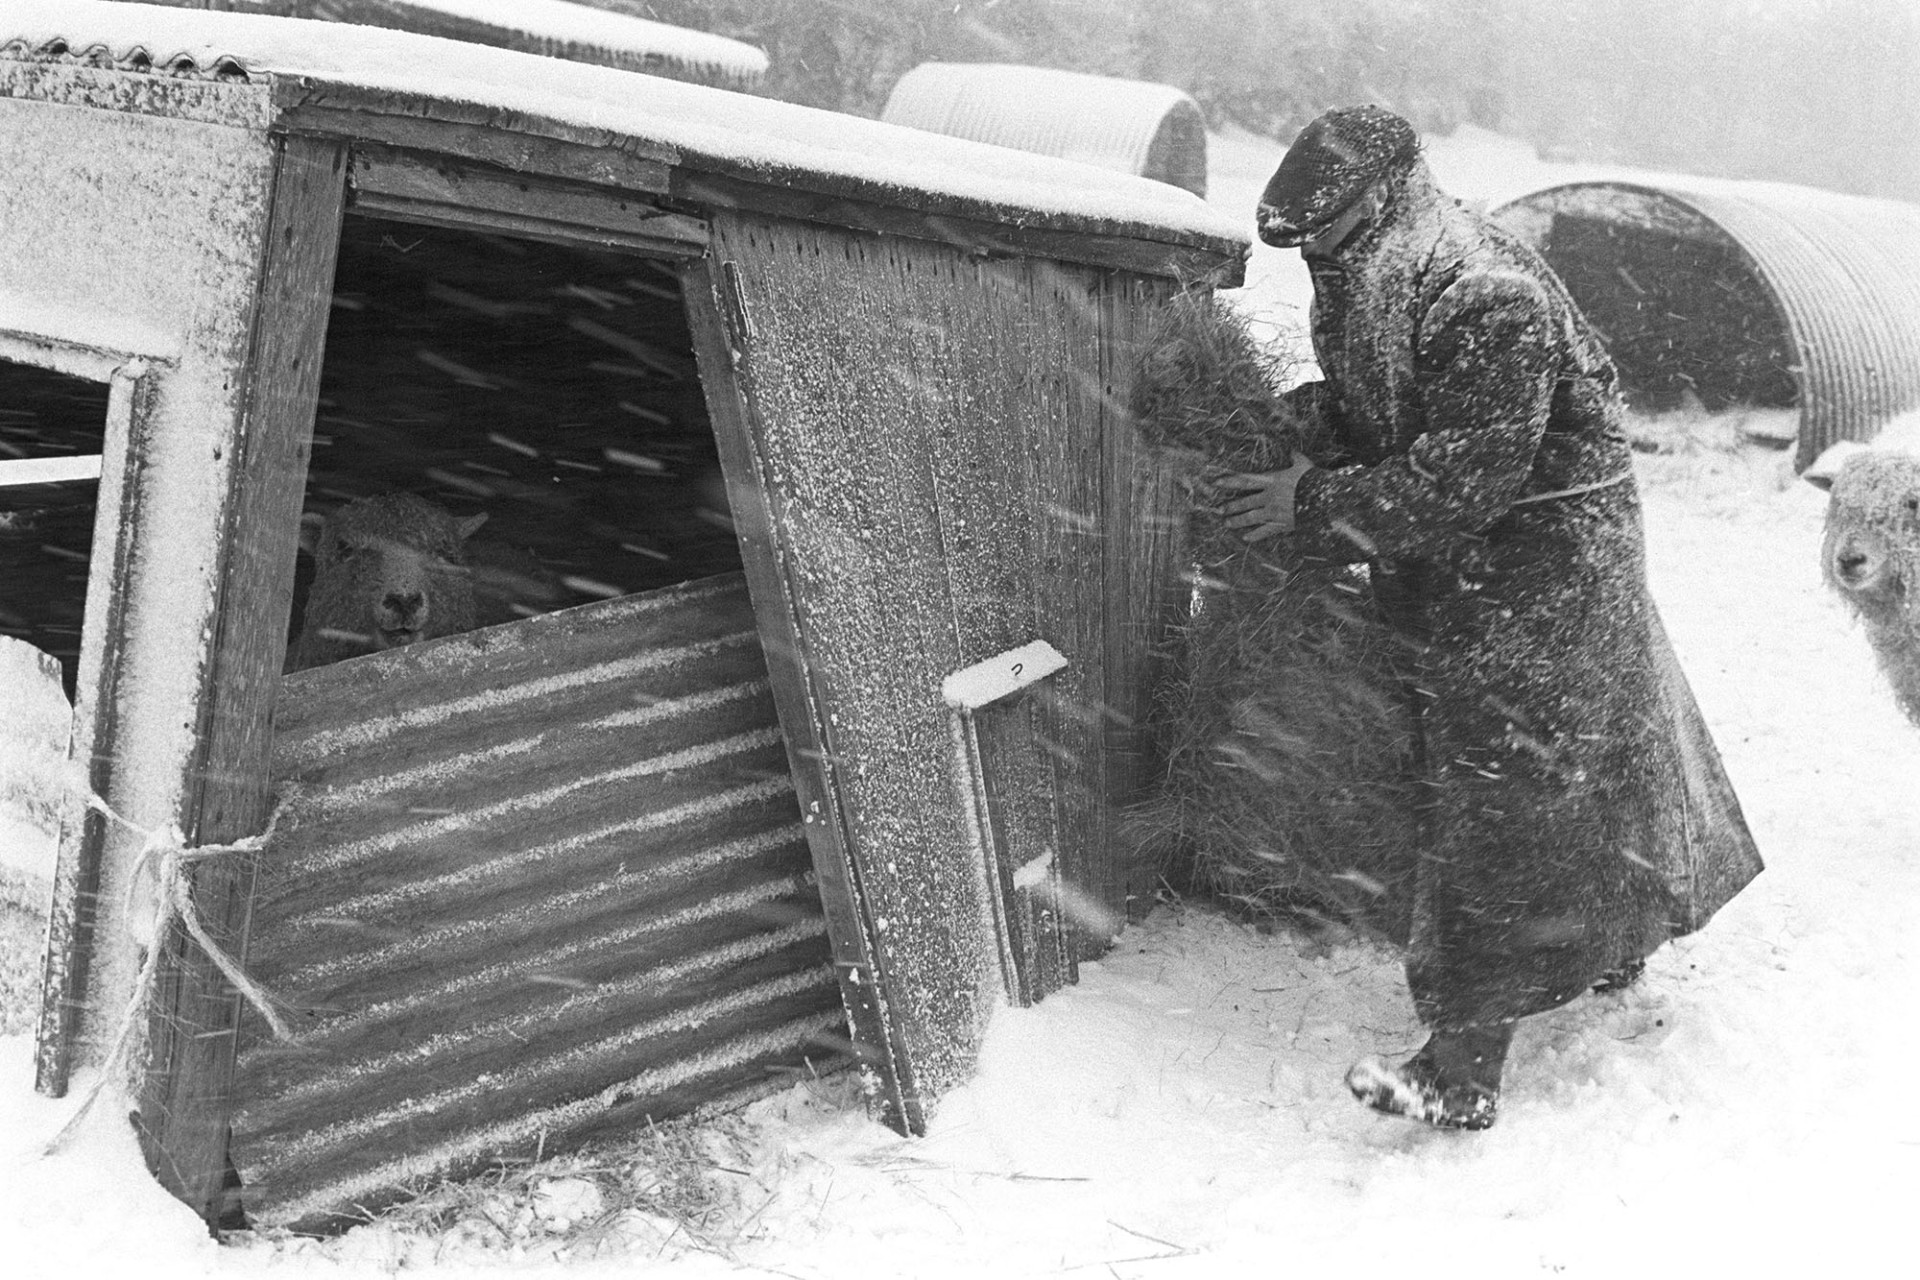 Snow, farmer feeding sheep in blizzard. 
[Ivor Brock feeding hay to a sheep in a wooden and corrugated iron shed, at Millhams, Dolton, in a snow blizzard. Other sheds are visible in the background.]